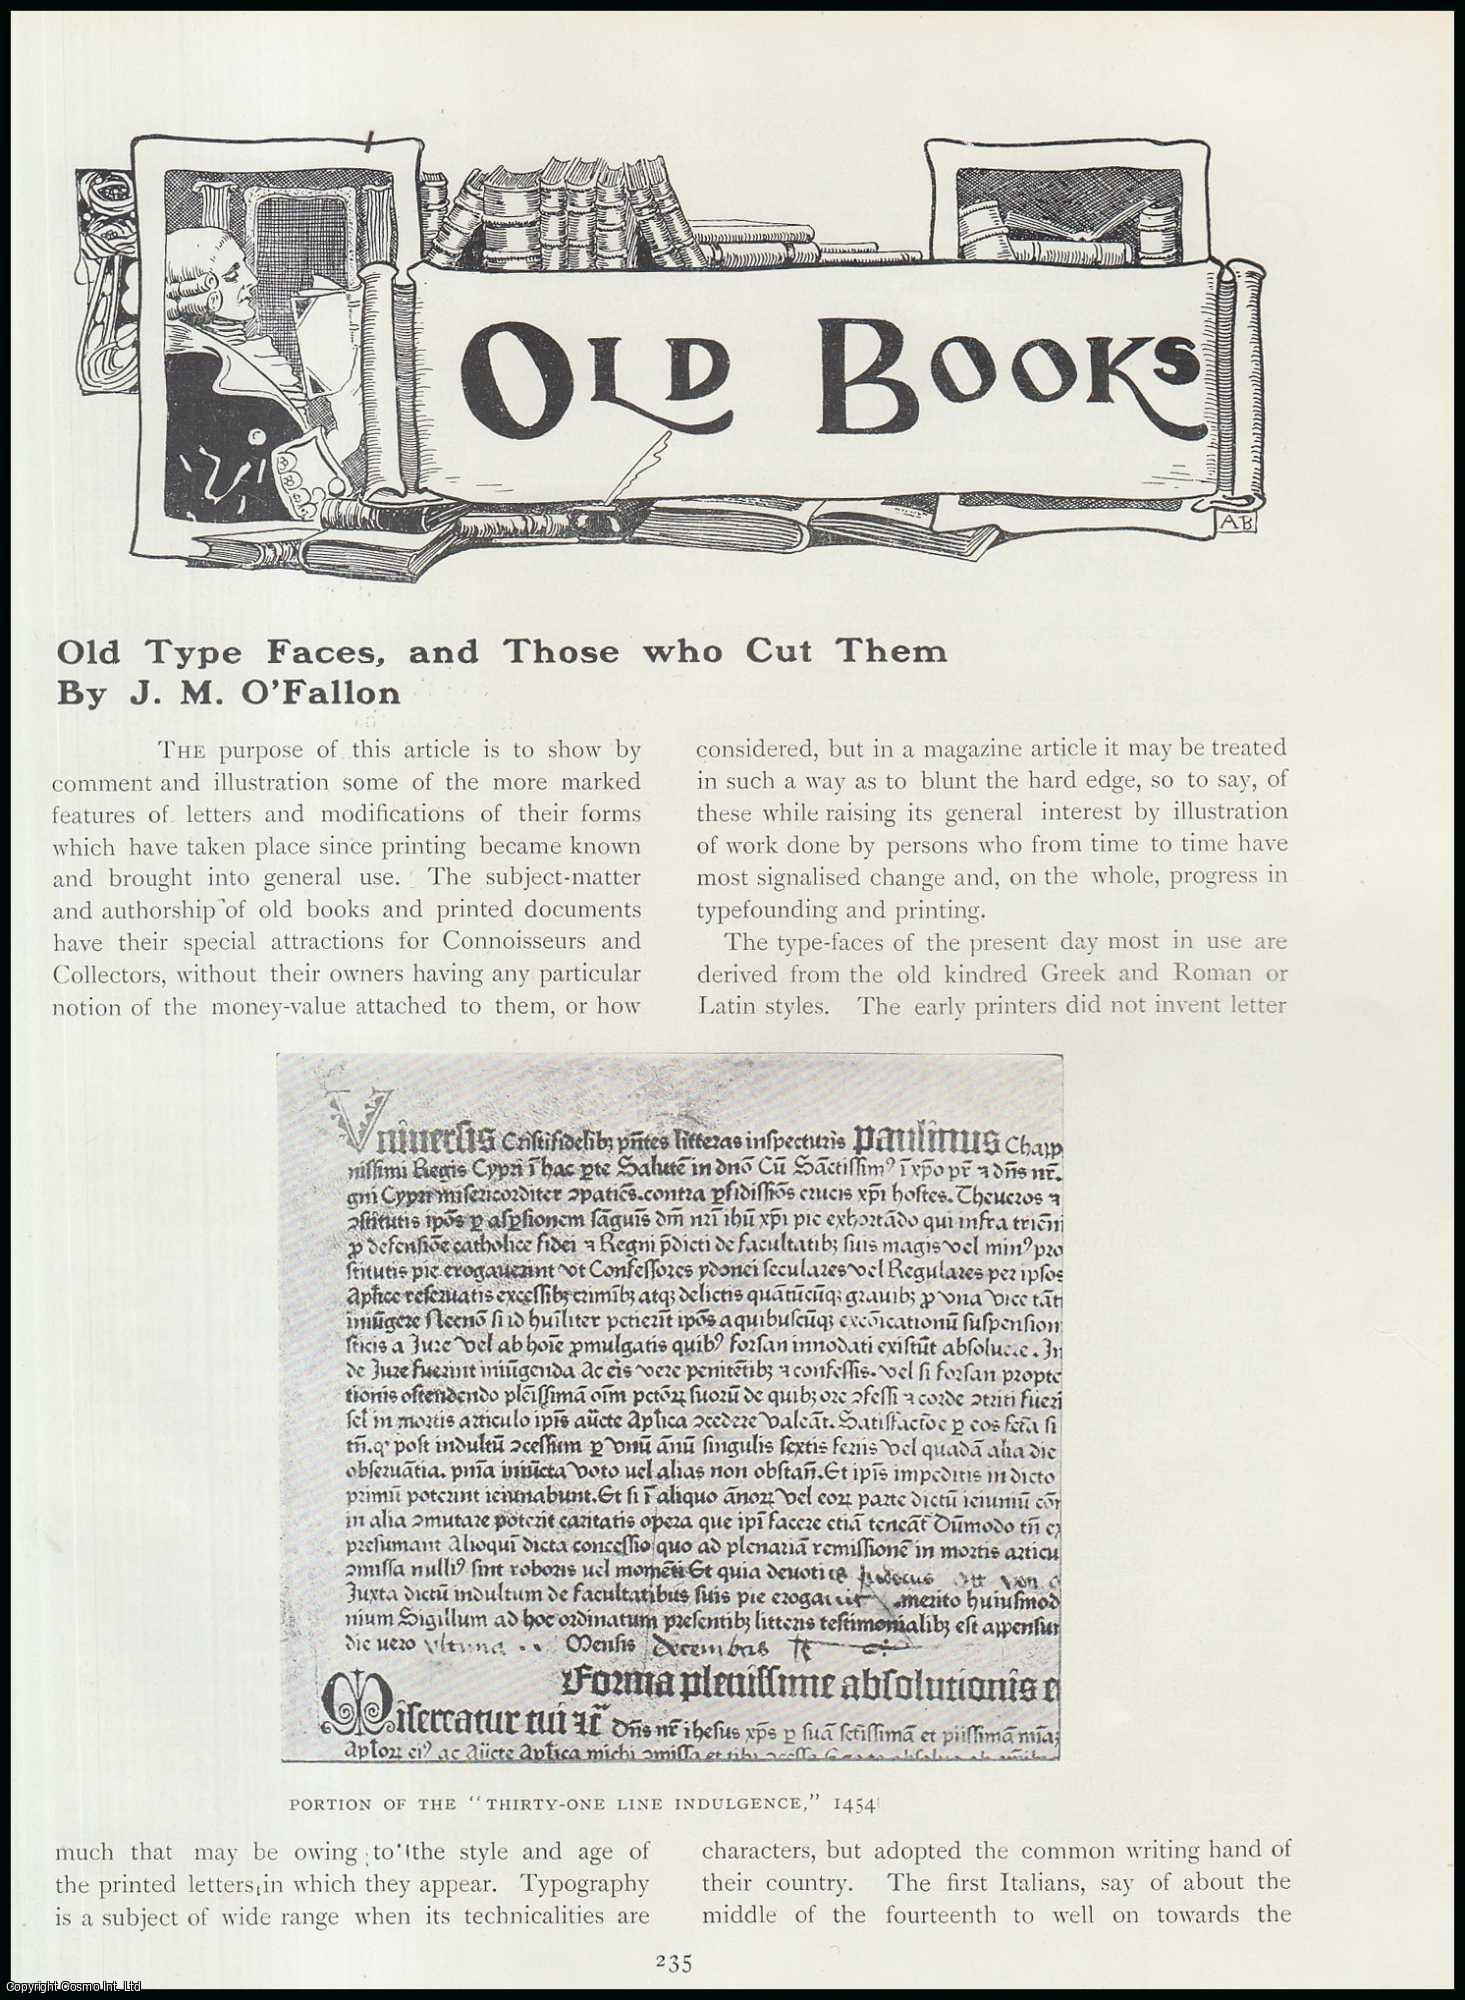 J.M. O'Fallon - Old Type Faces, and Those who Cut Them. An original article from The Connoisseur, 1906.